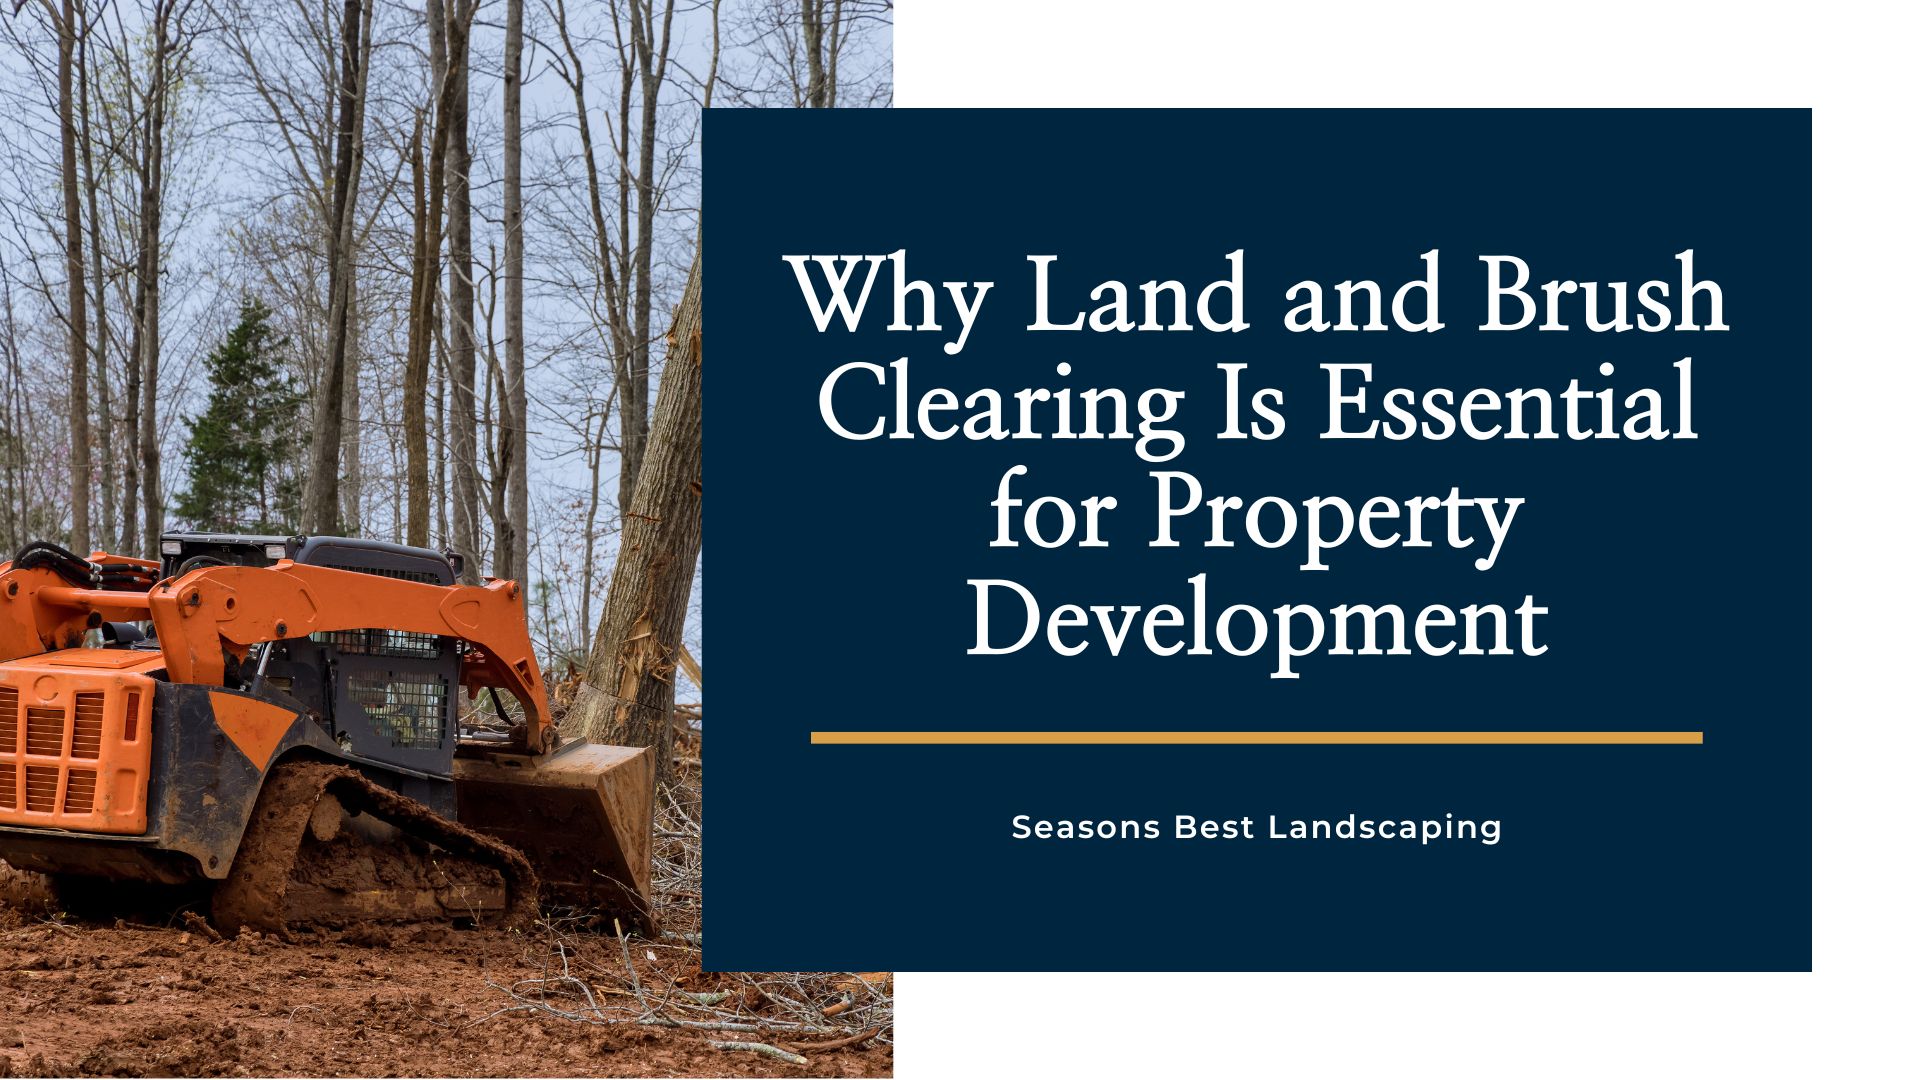 Land and Brush Clearing Benefits